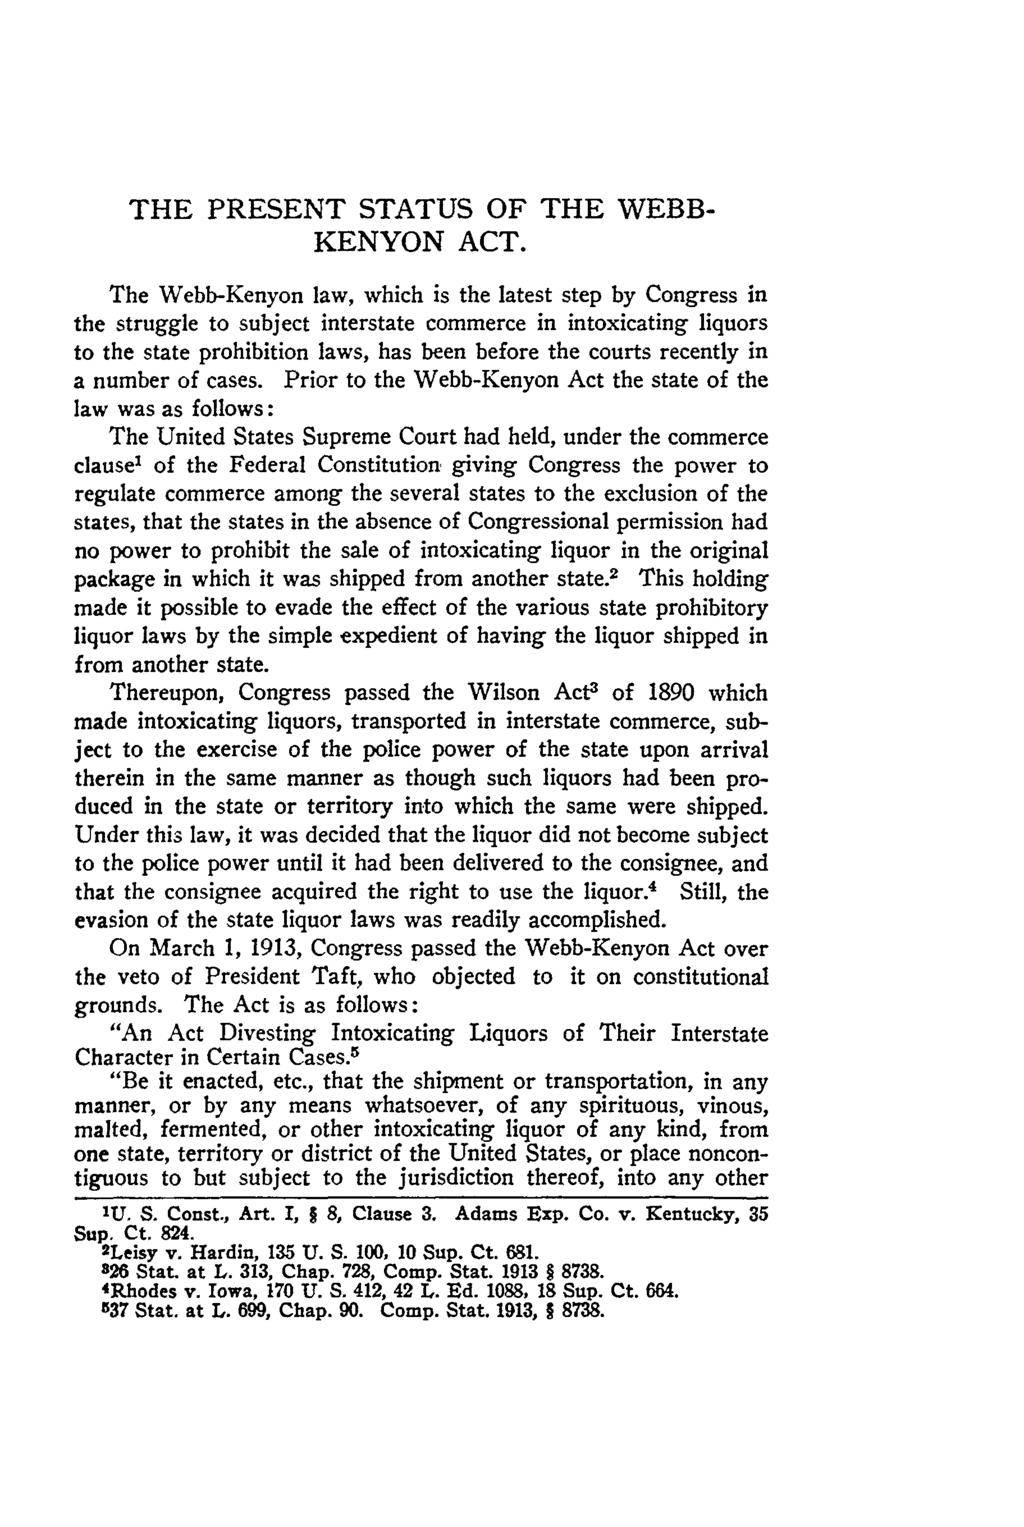 THE PRESENT STATUS OF THE WEBB- KENYON ACT.